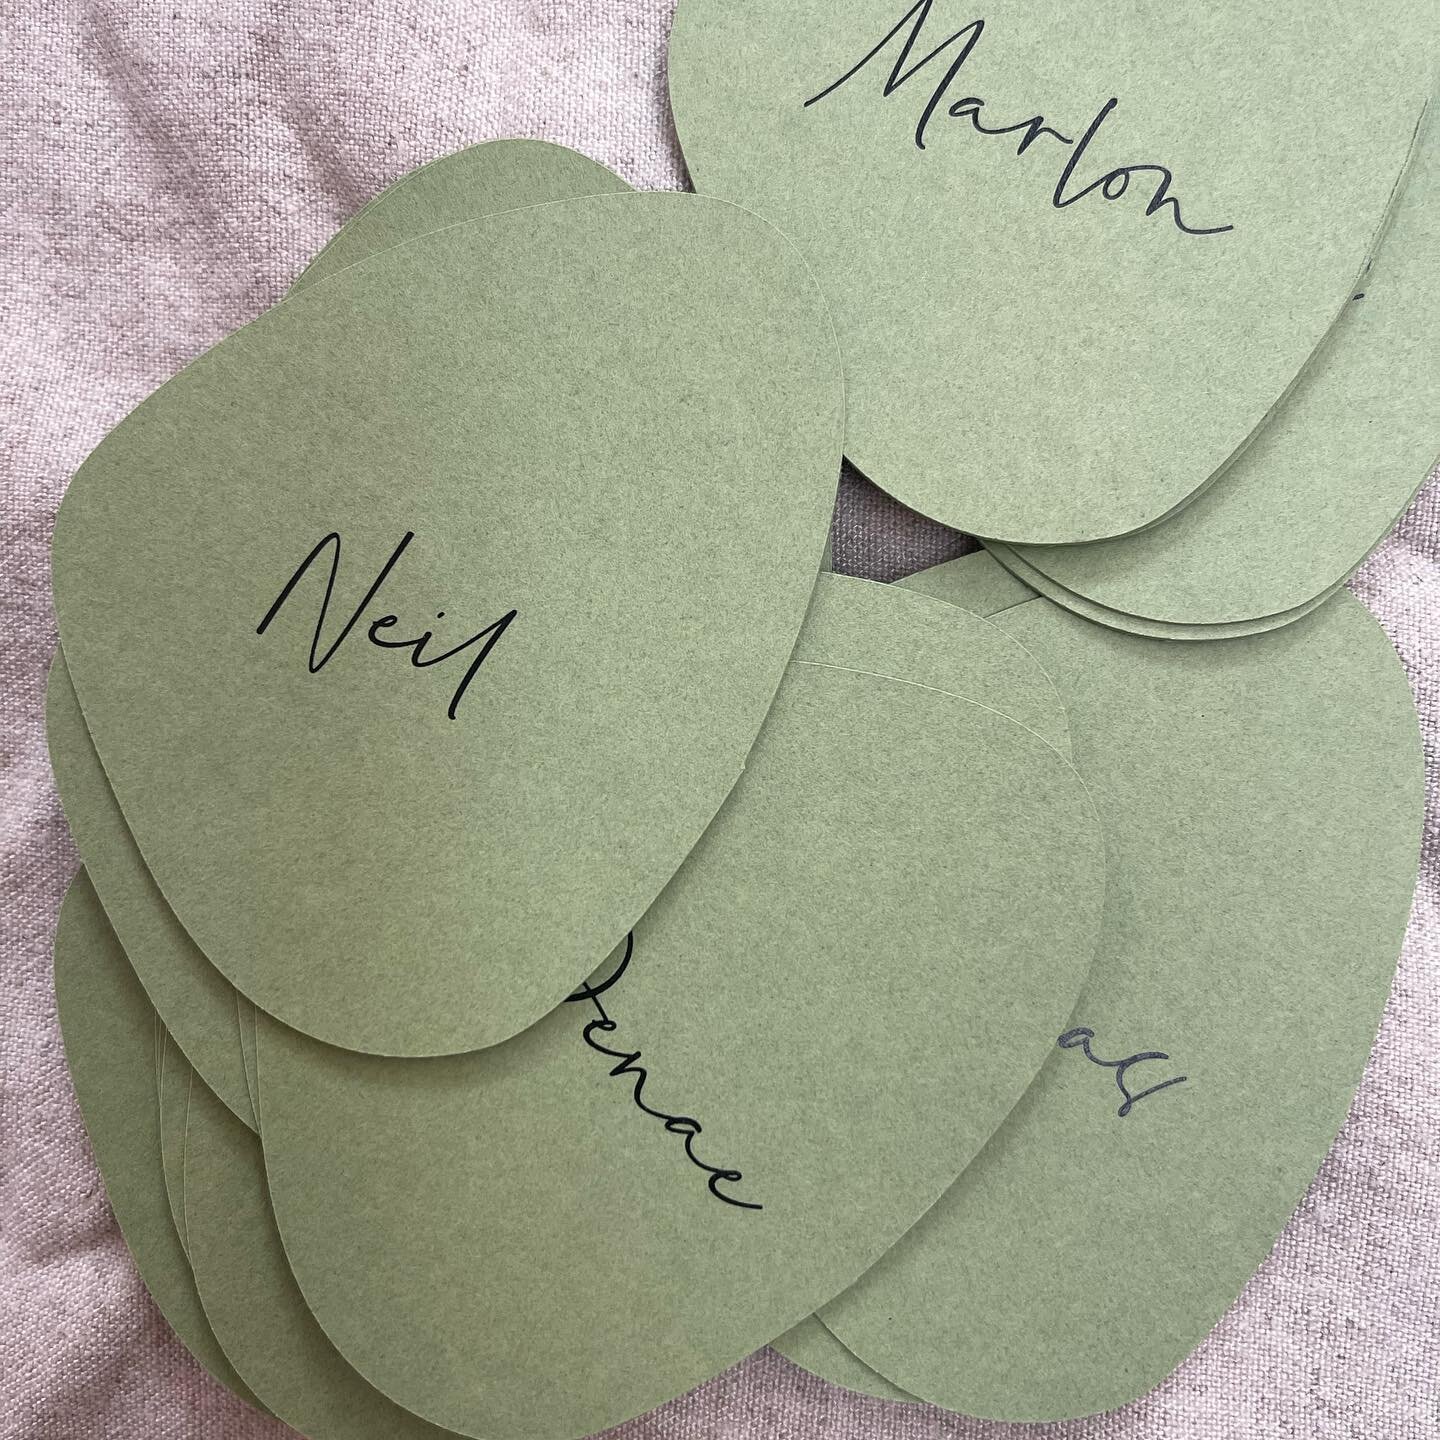 Place cards in green 🌱

#placecards #wedding #green #stationary #adelaide